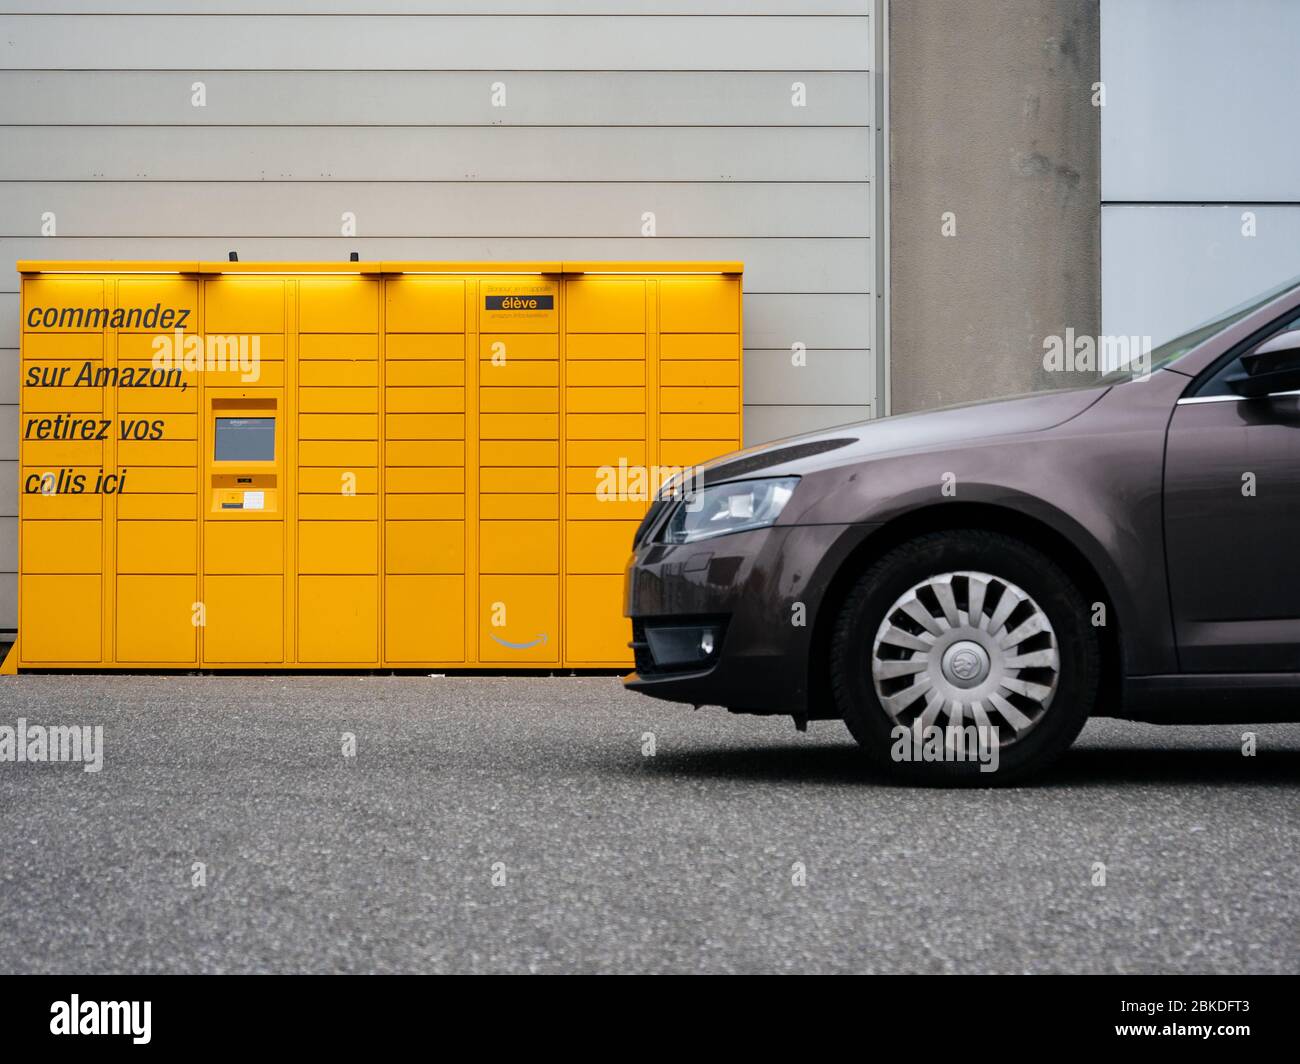 Paris, France - Mar 29, 2020: Side view of new Skoda Octavia car in front  of yellow Amazon Locker - self-service package delivery service offered by  online retailer Amazon Stock Photo - Alamy